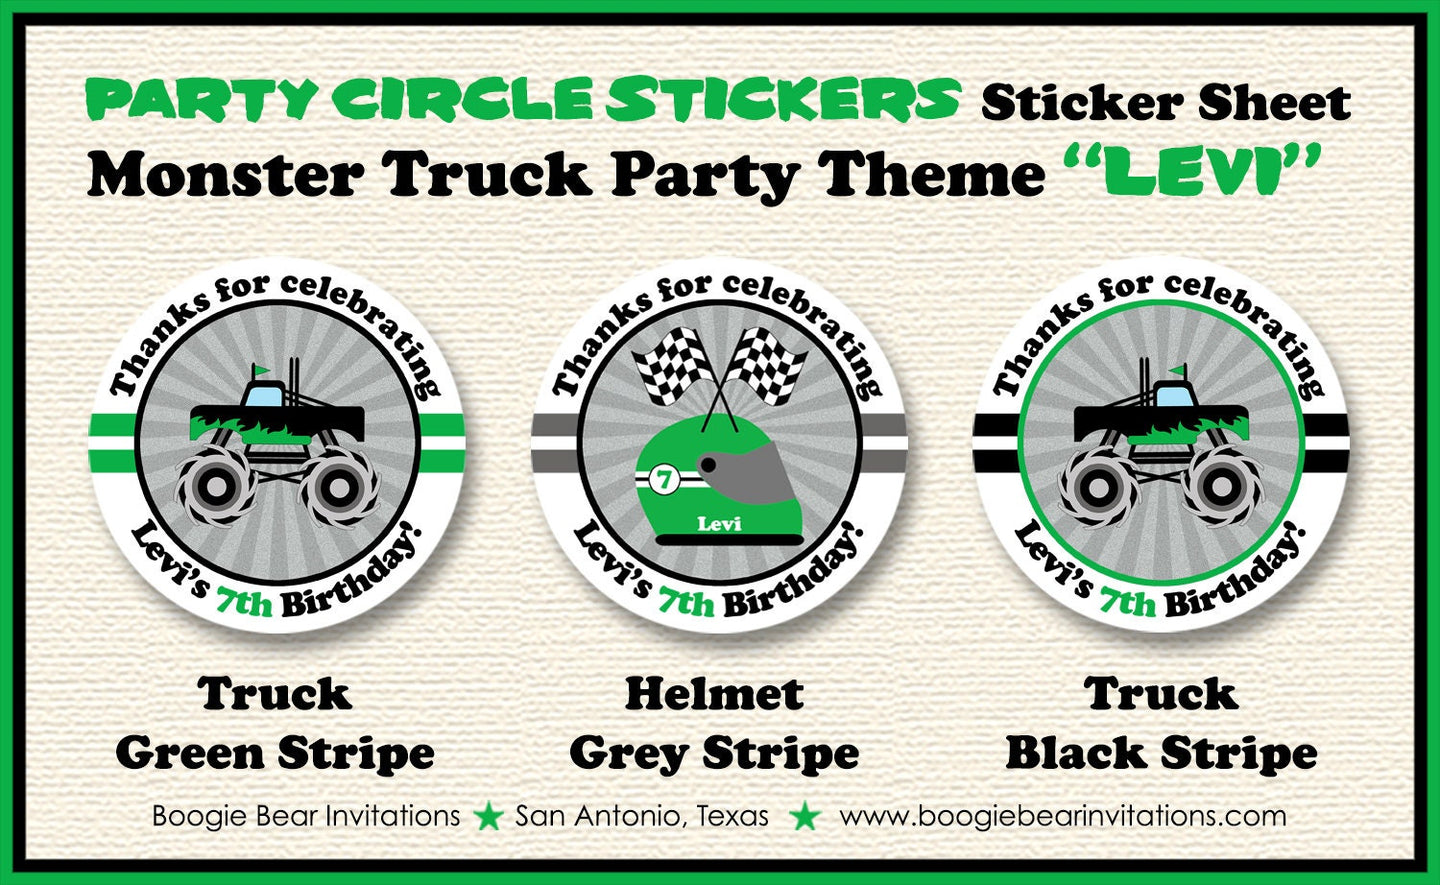 Monster Truck Birthday Party Stickers Circle Sheet Round Green Black Smash Up Show Demo Arena Race Racing Boogie Bear Invitations Levi Theme